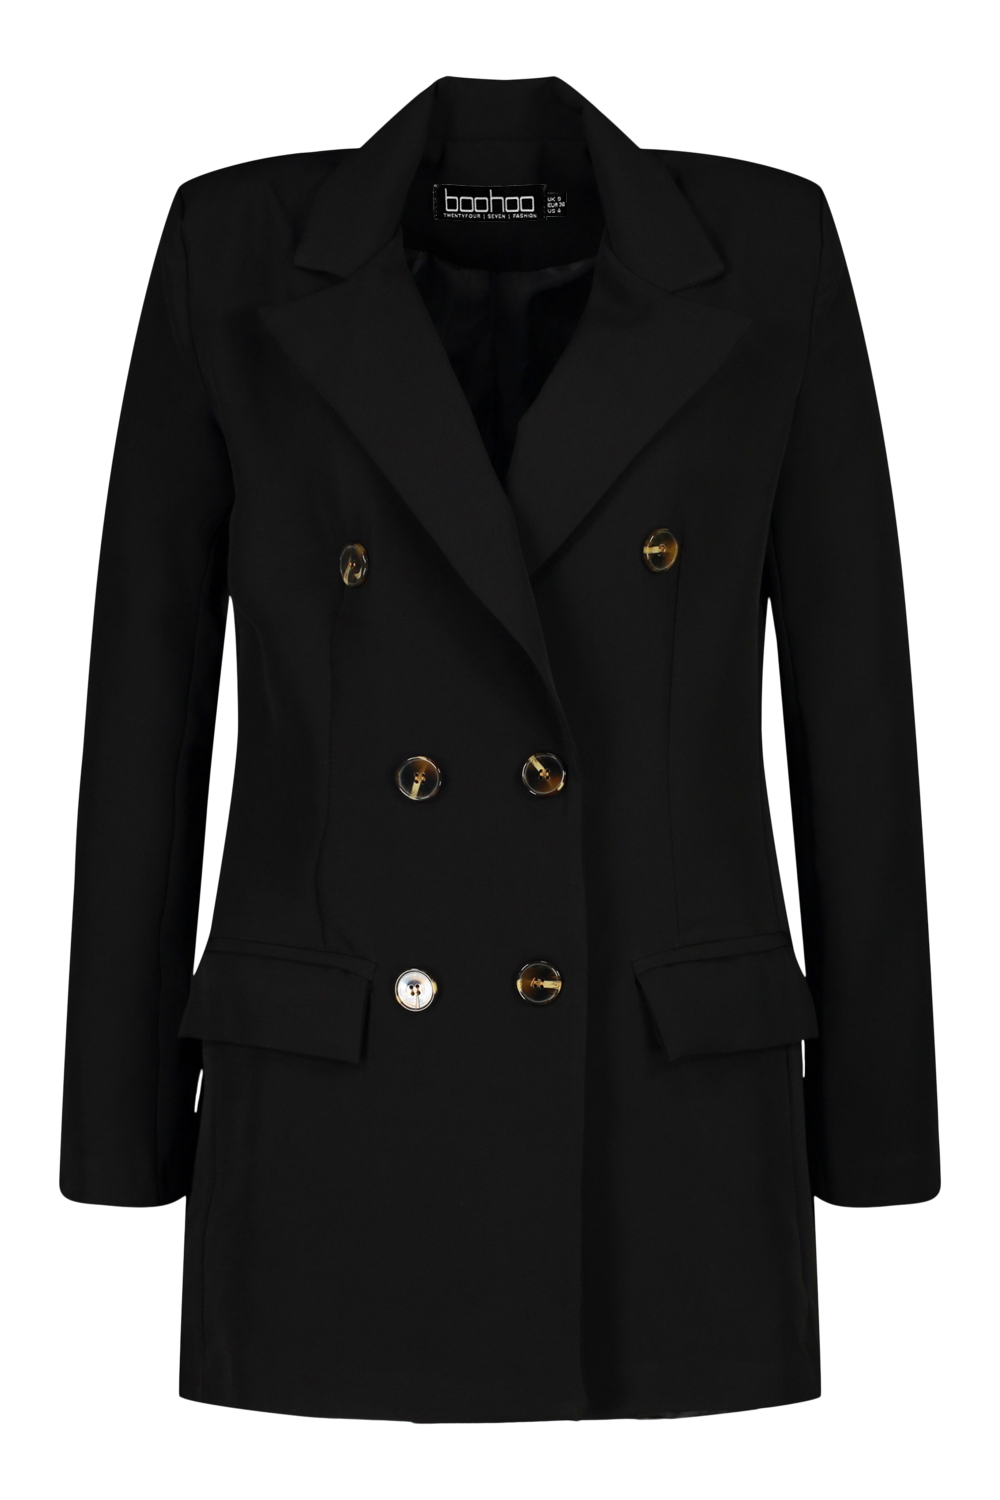 Gucci Men's Double-Breasted Longline Coat